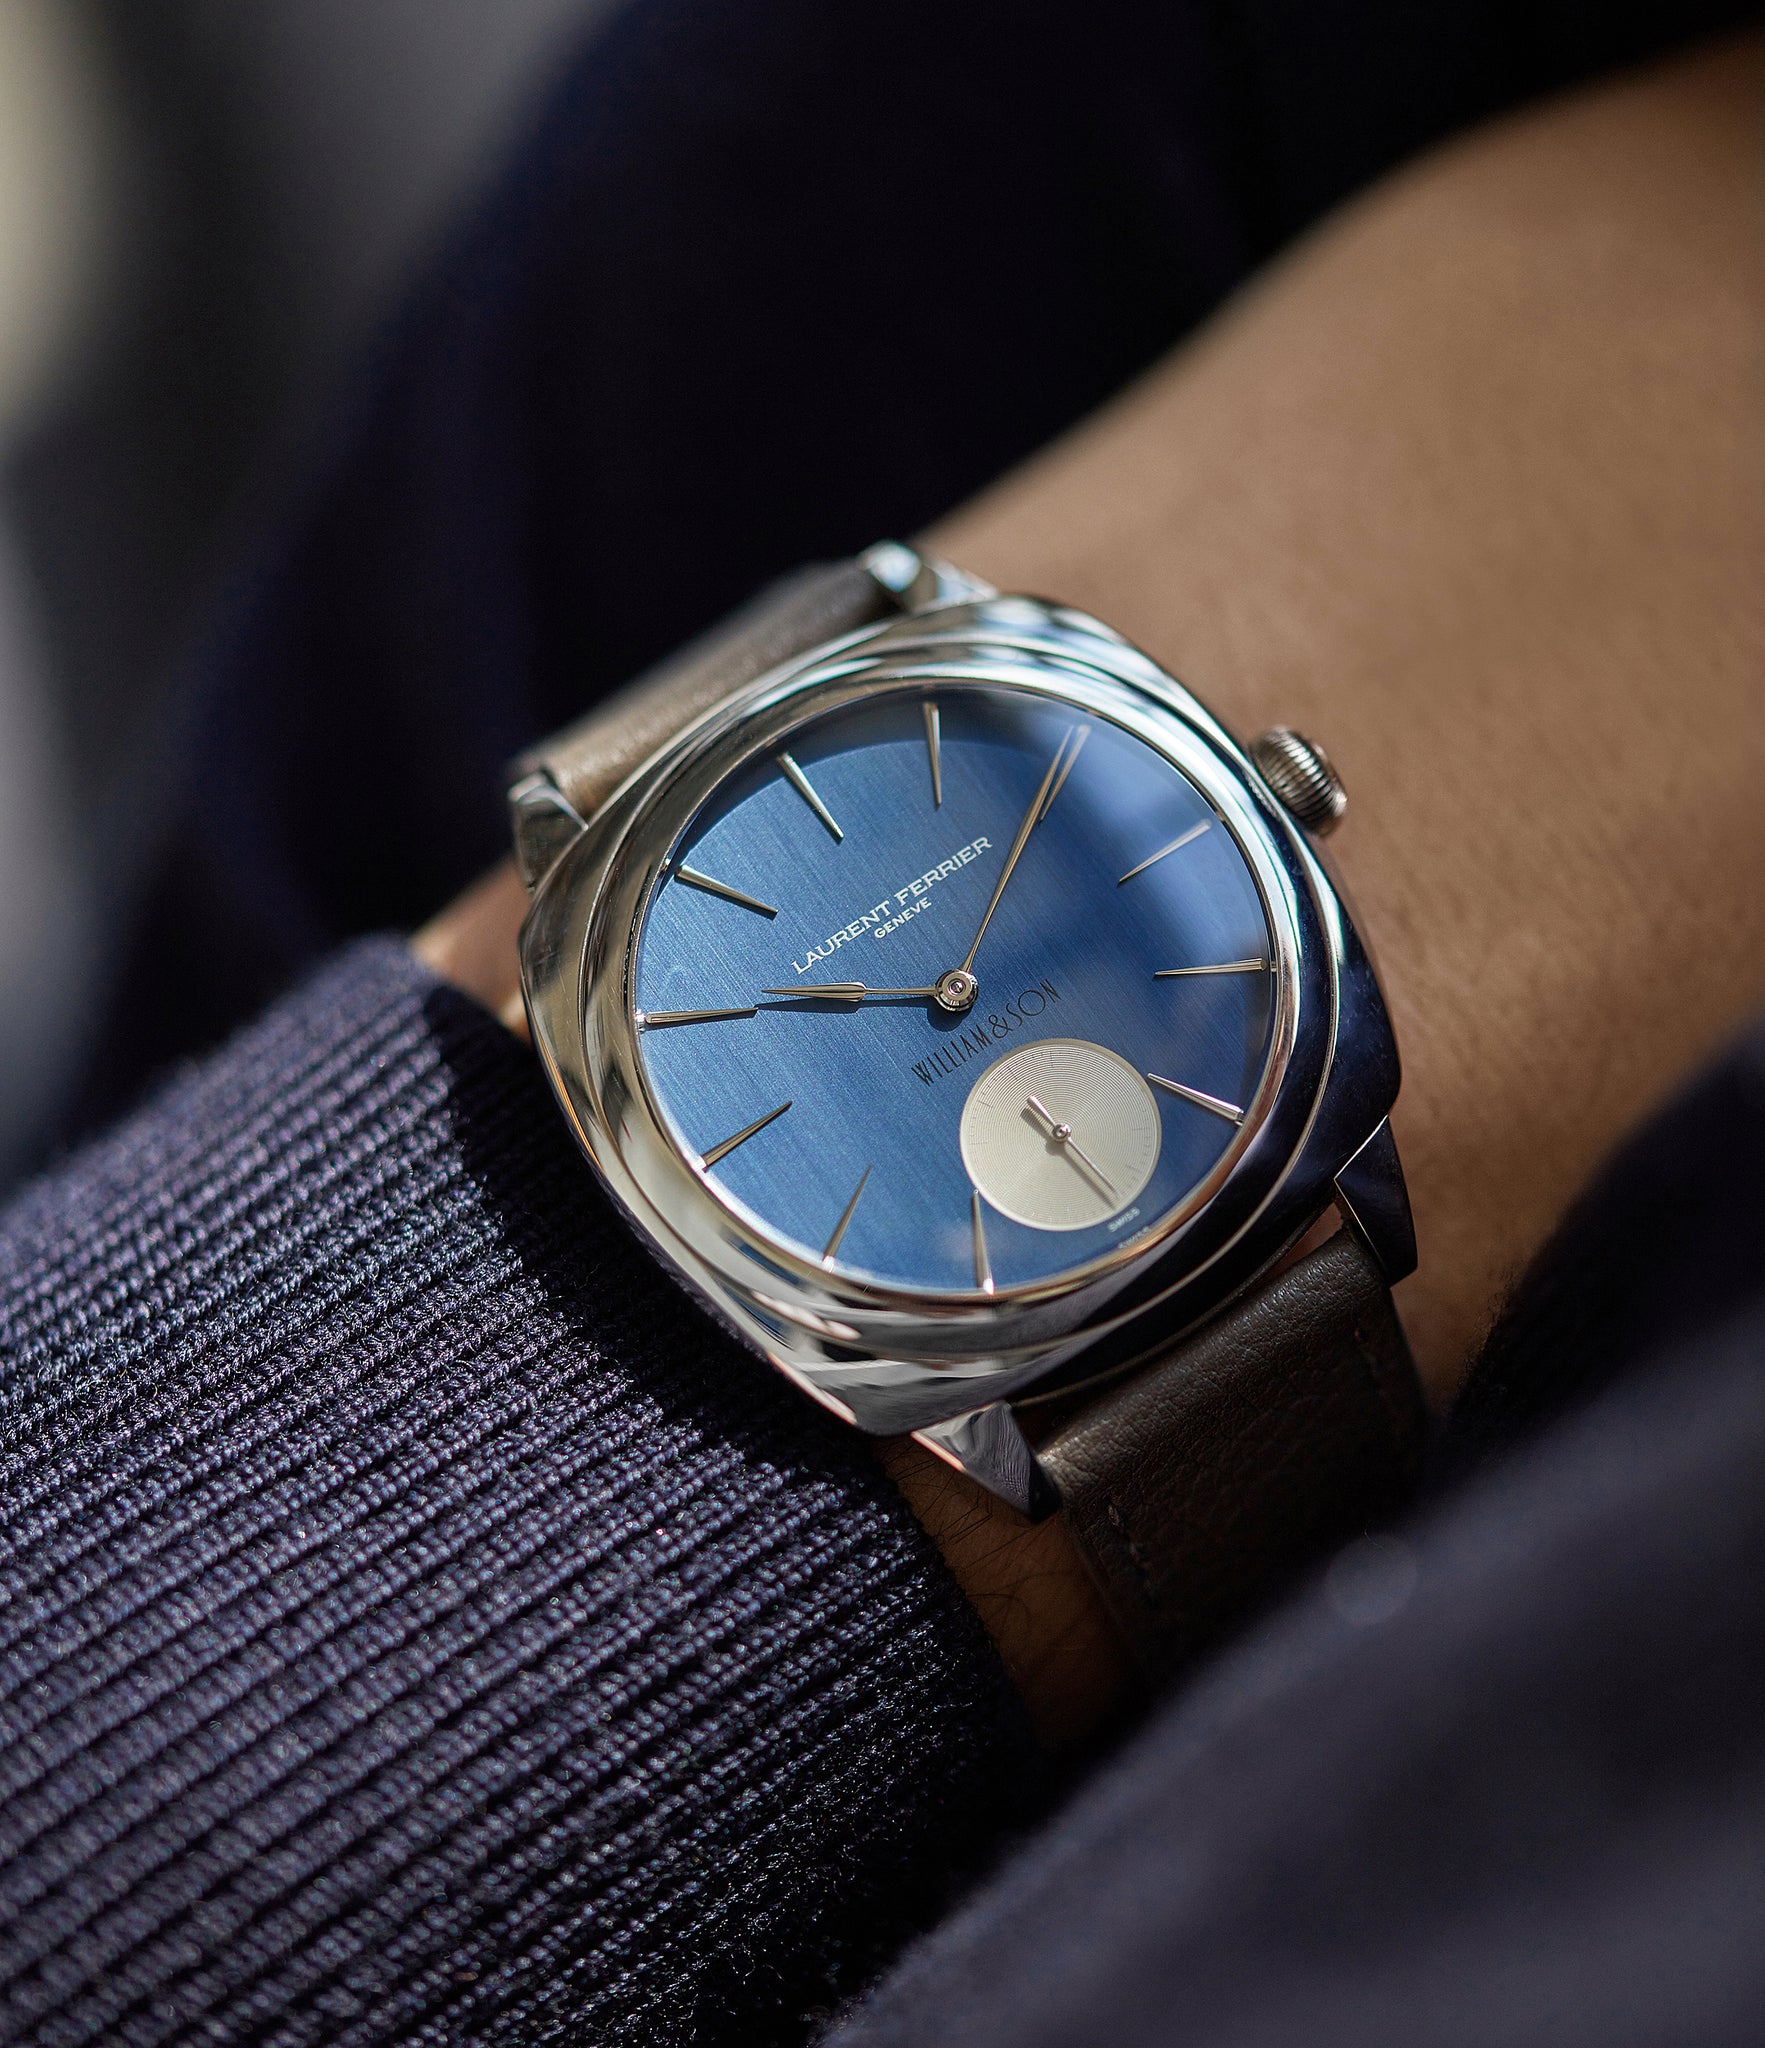 on the wrist Laurent Ferrier Micro Rotor LF 229.01 Galet Square William&Son blue dial white gold watch online at A Collected Man London approved seller of preowned independent watchmakers